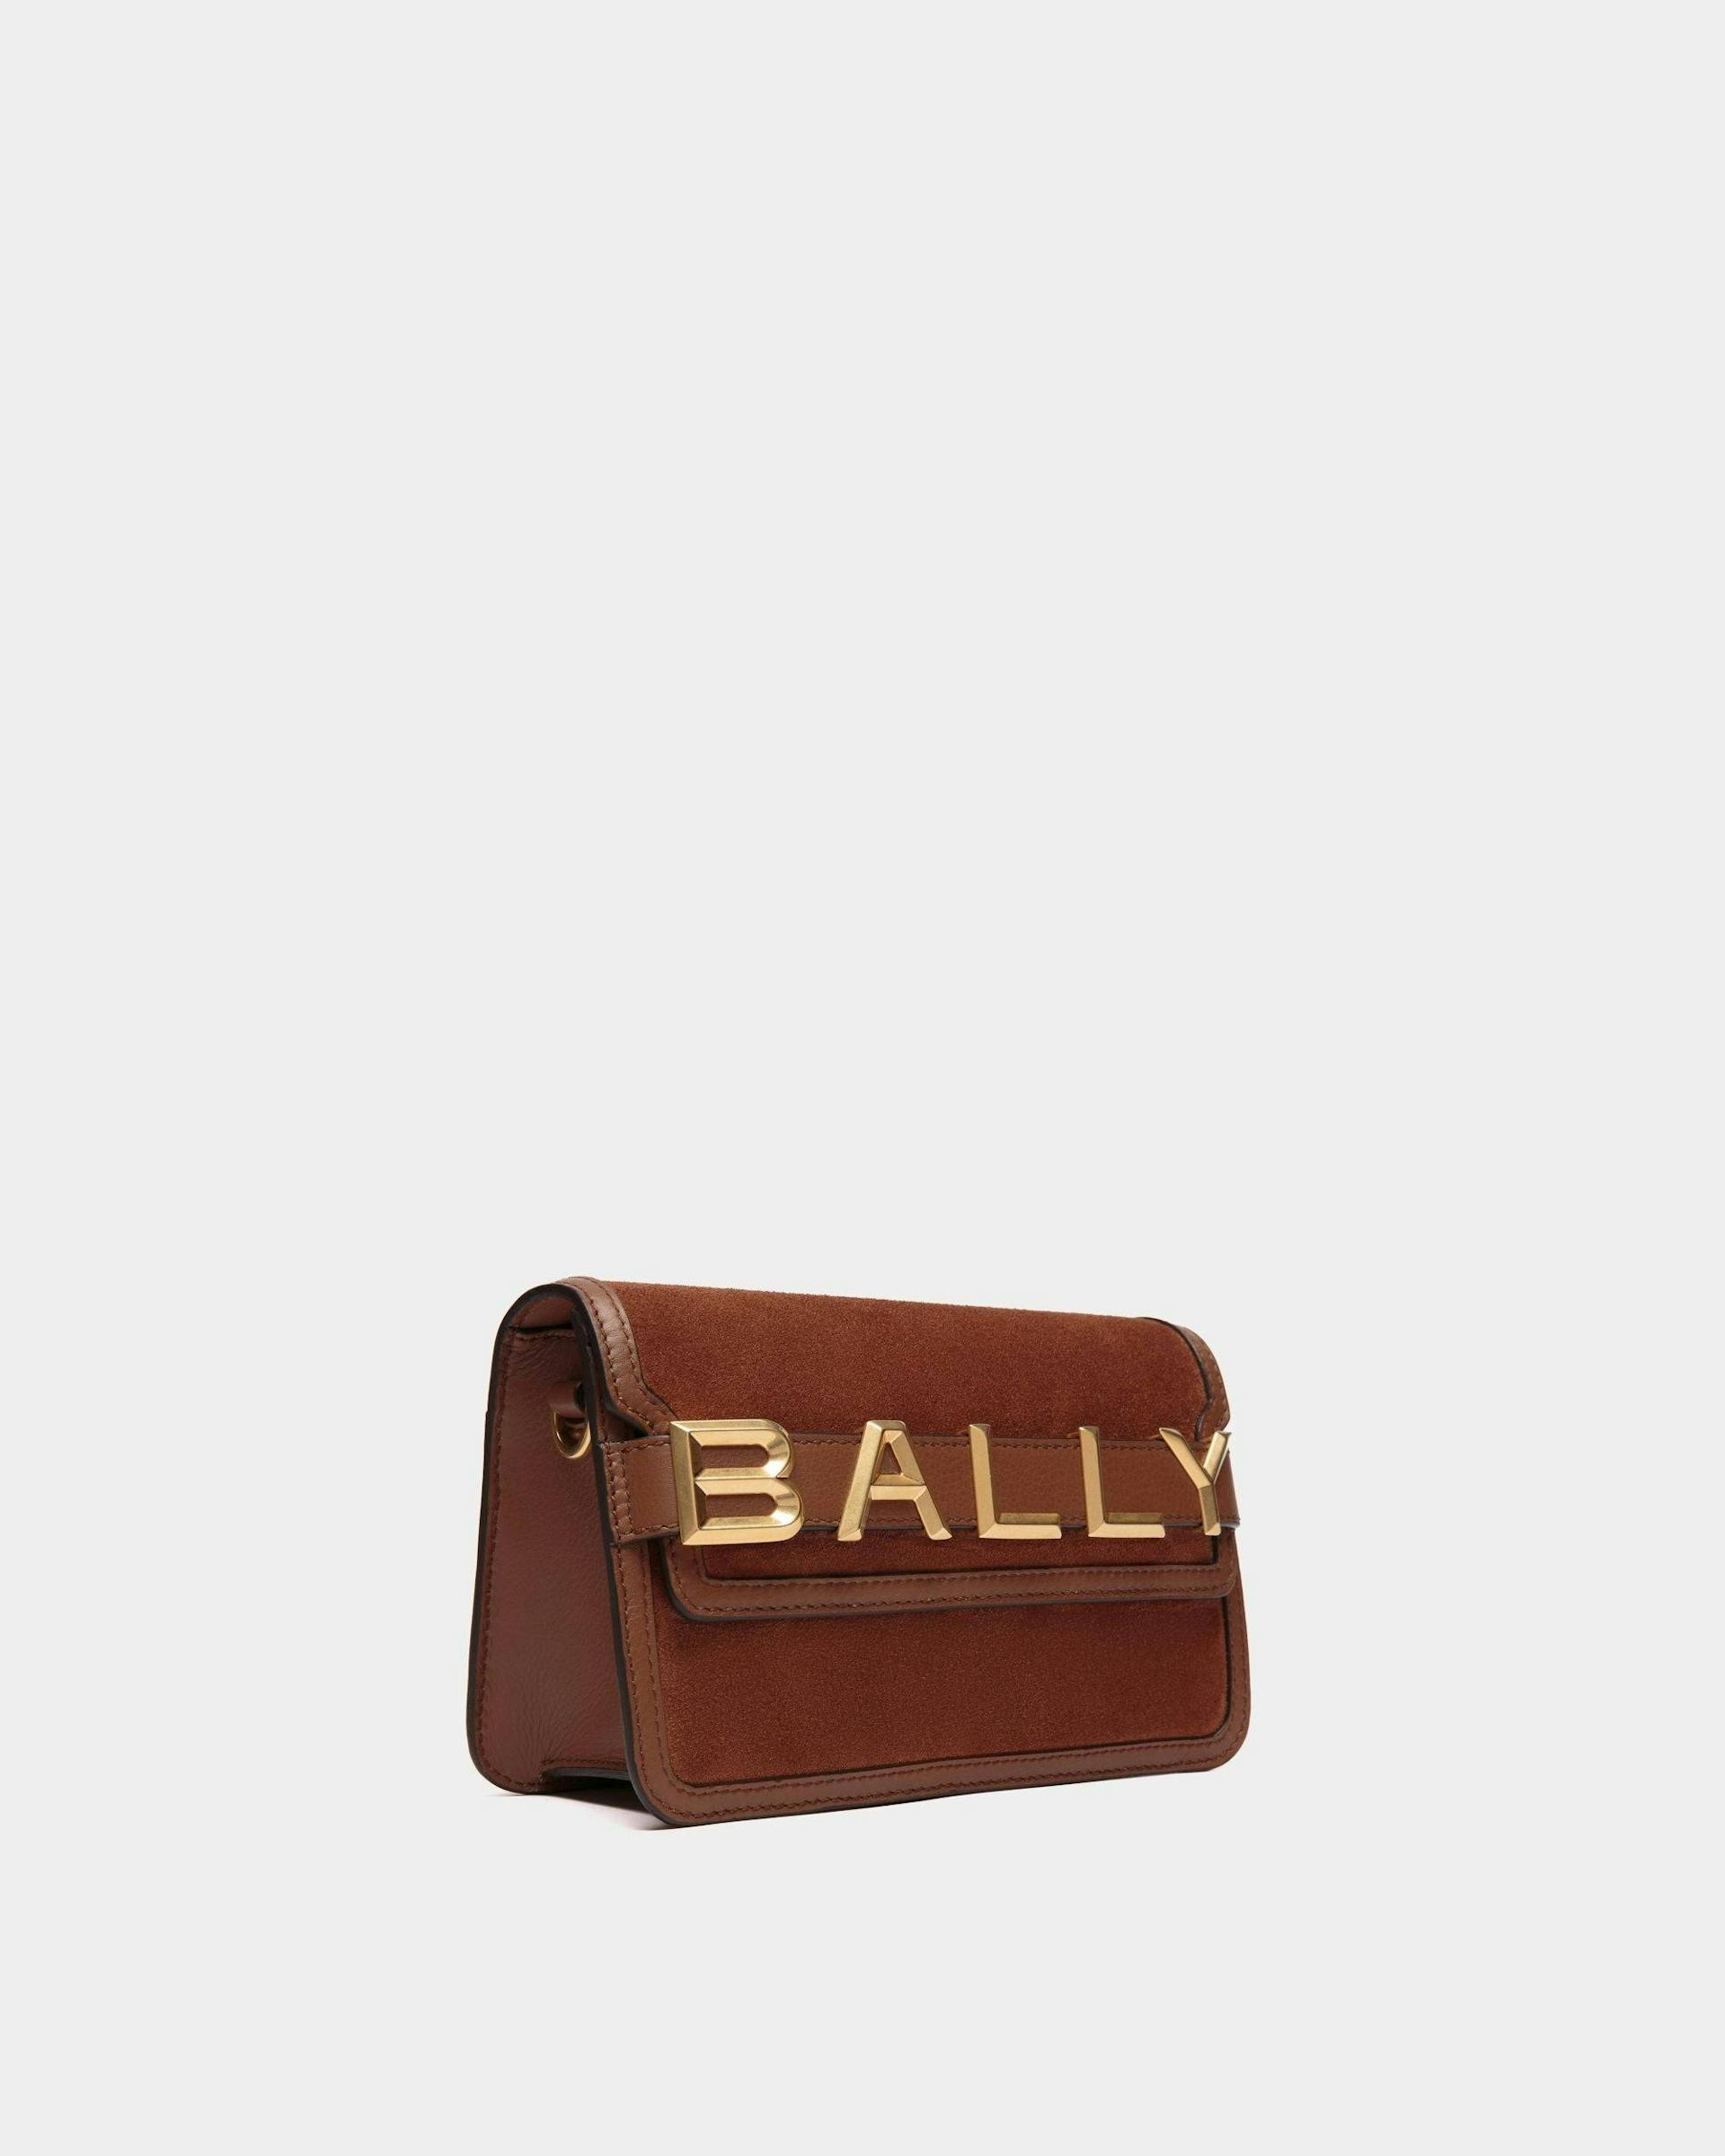 Women's Bally Spell Crossbody Bag in Brown Suede | Bally | Still Life 3/4 Front